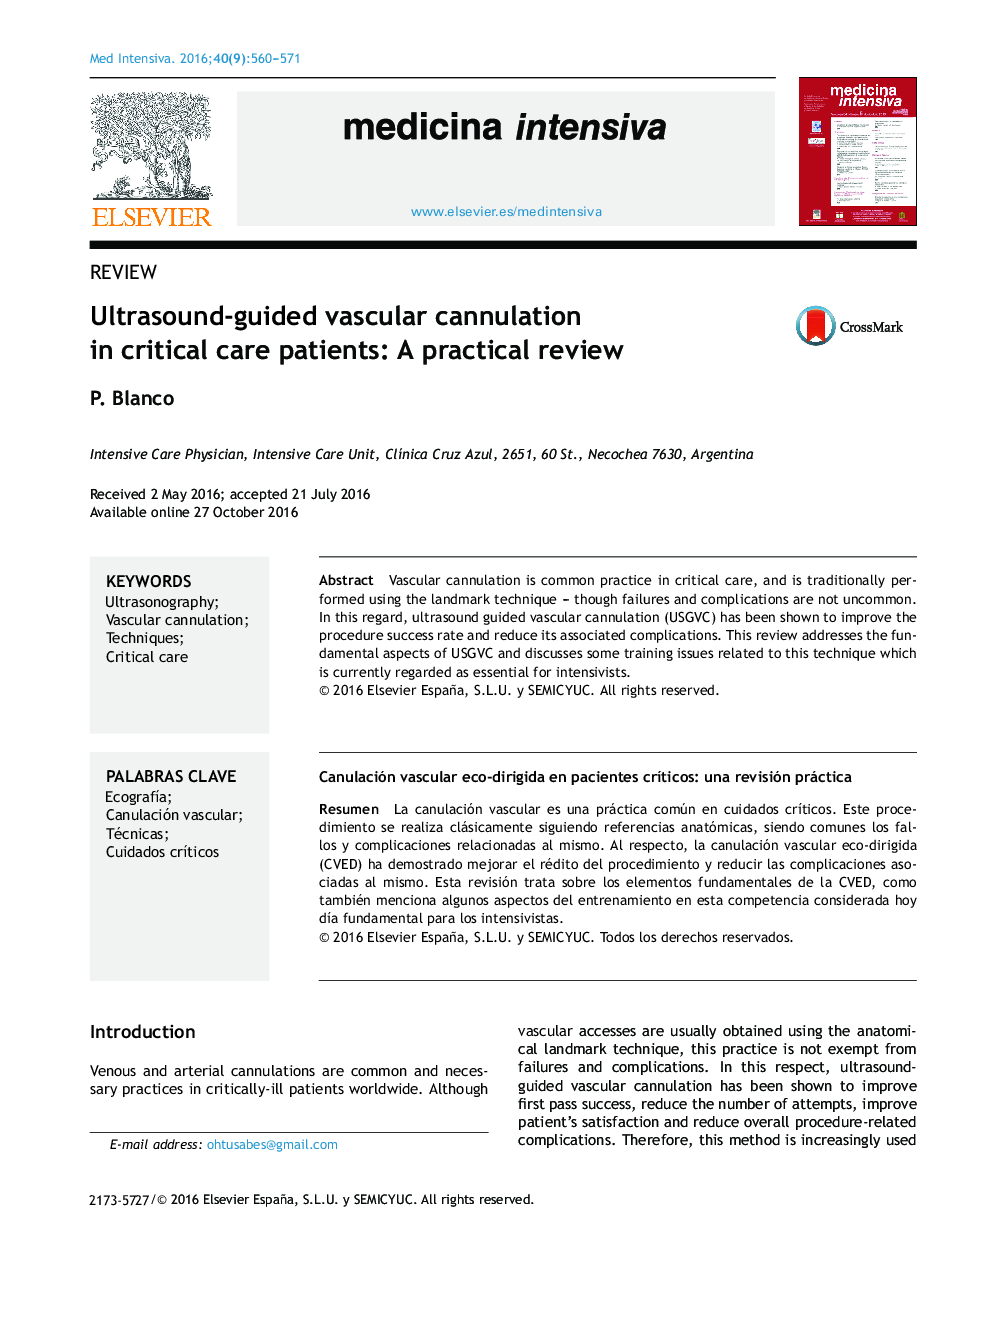 Ultrasound-guided vascular cannulation in critical care patients: A practical review